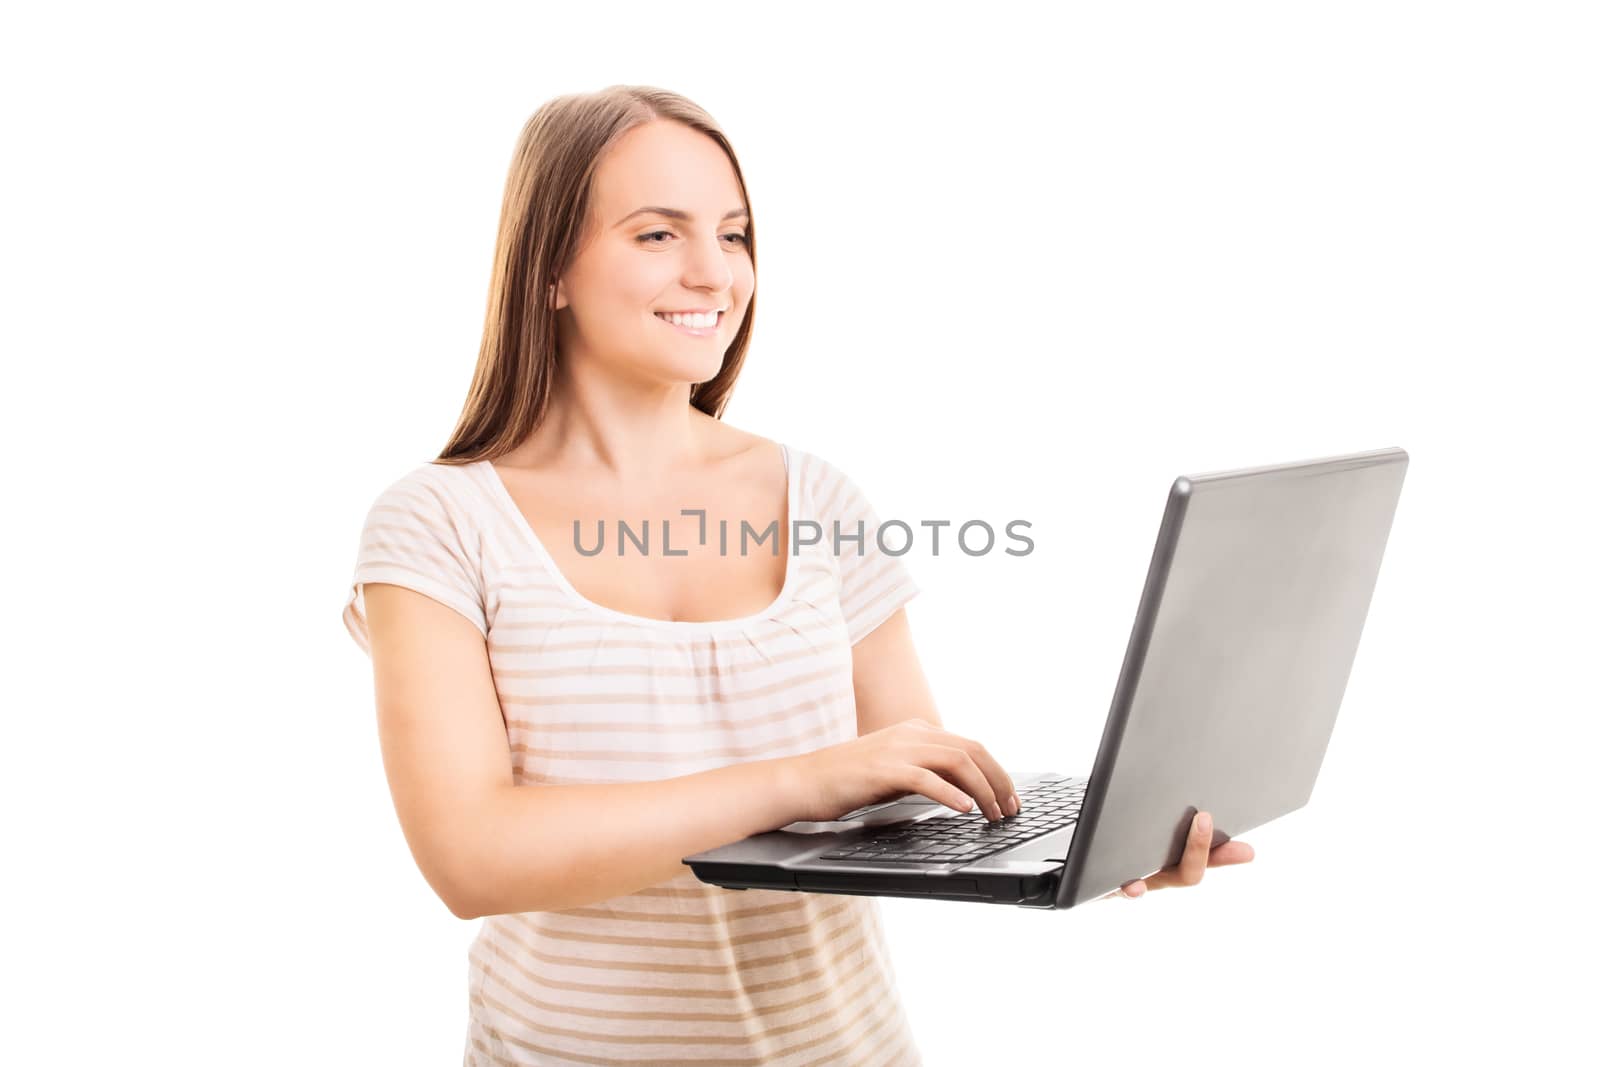 Portrait of a beautiful smiling young woman in casual clothes holding a laptop computer and typing with one hand, isolated on a white background. Technology concept.